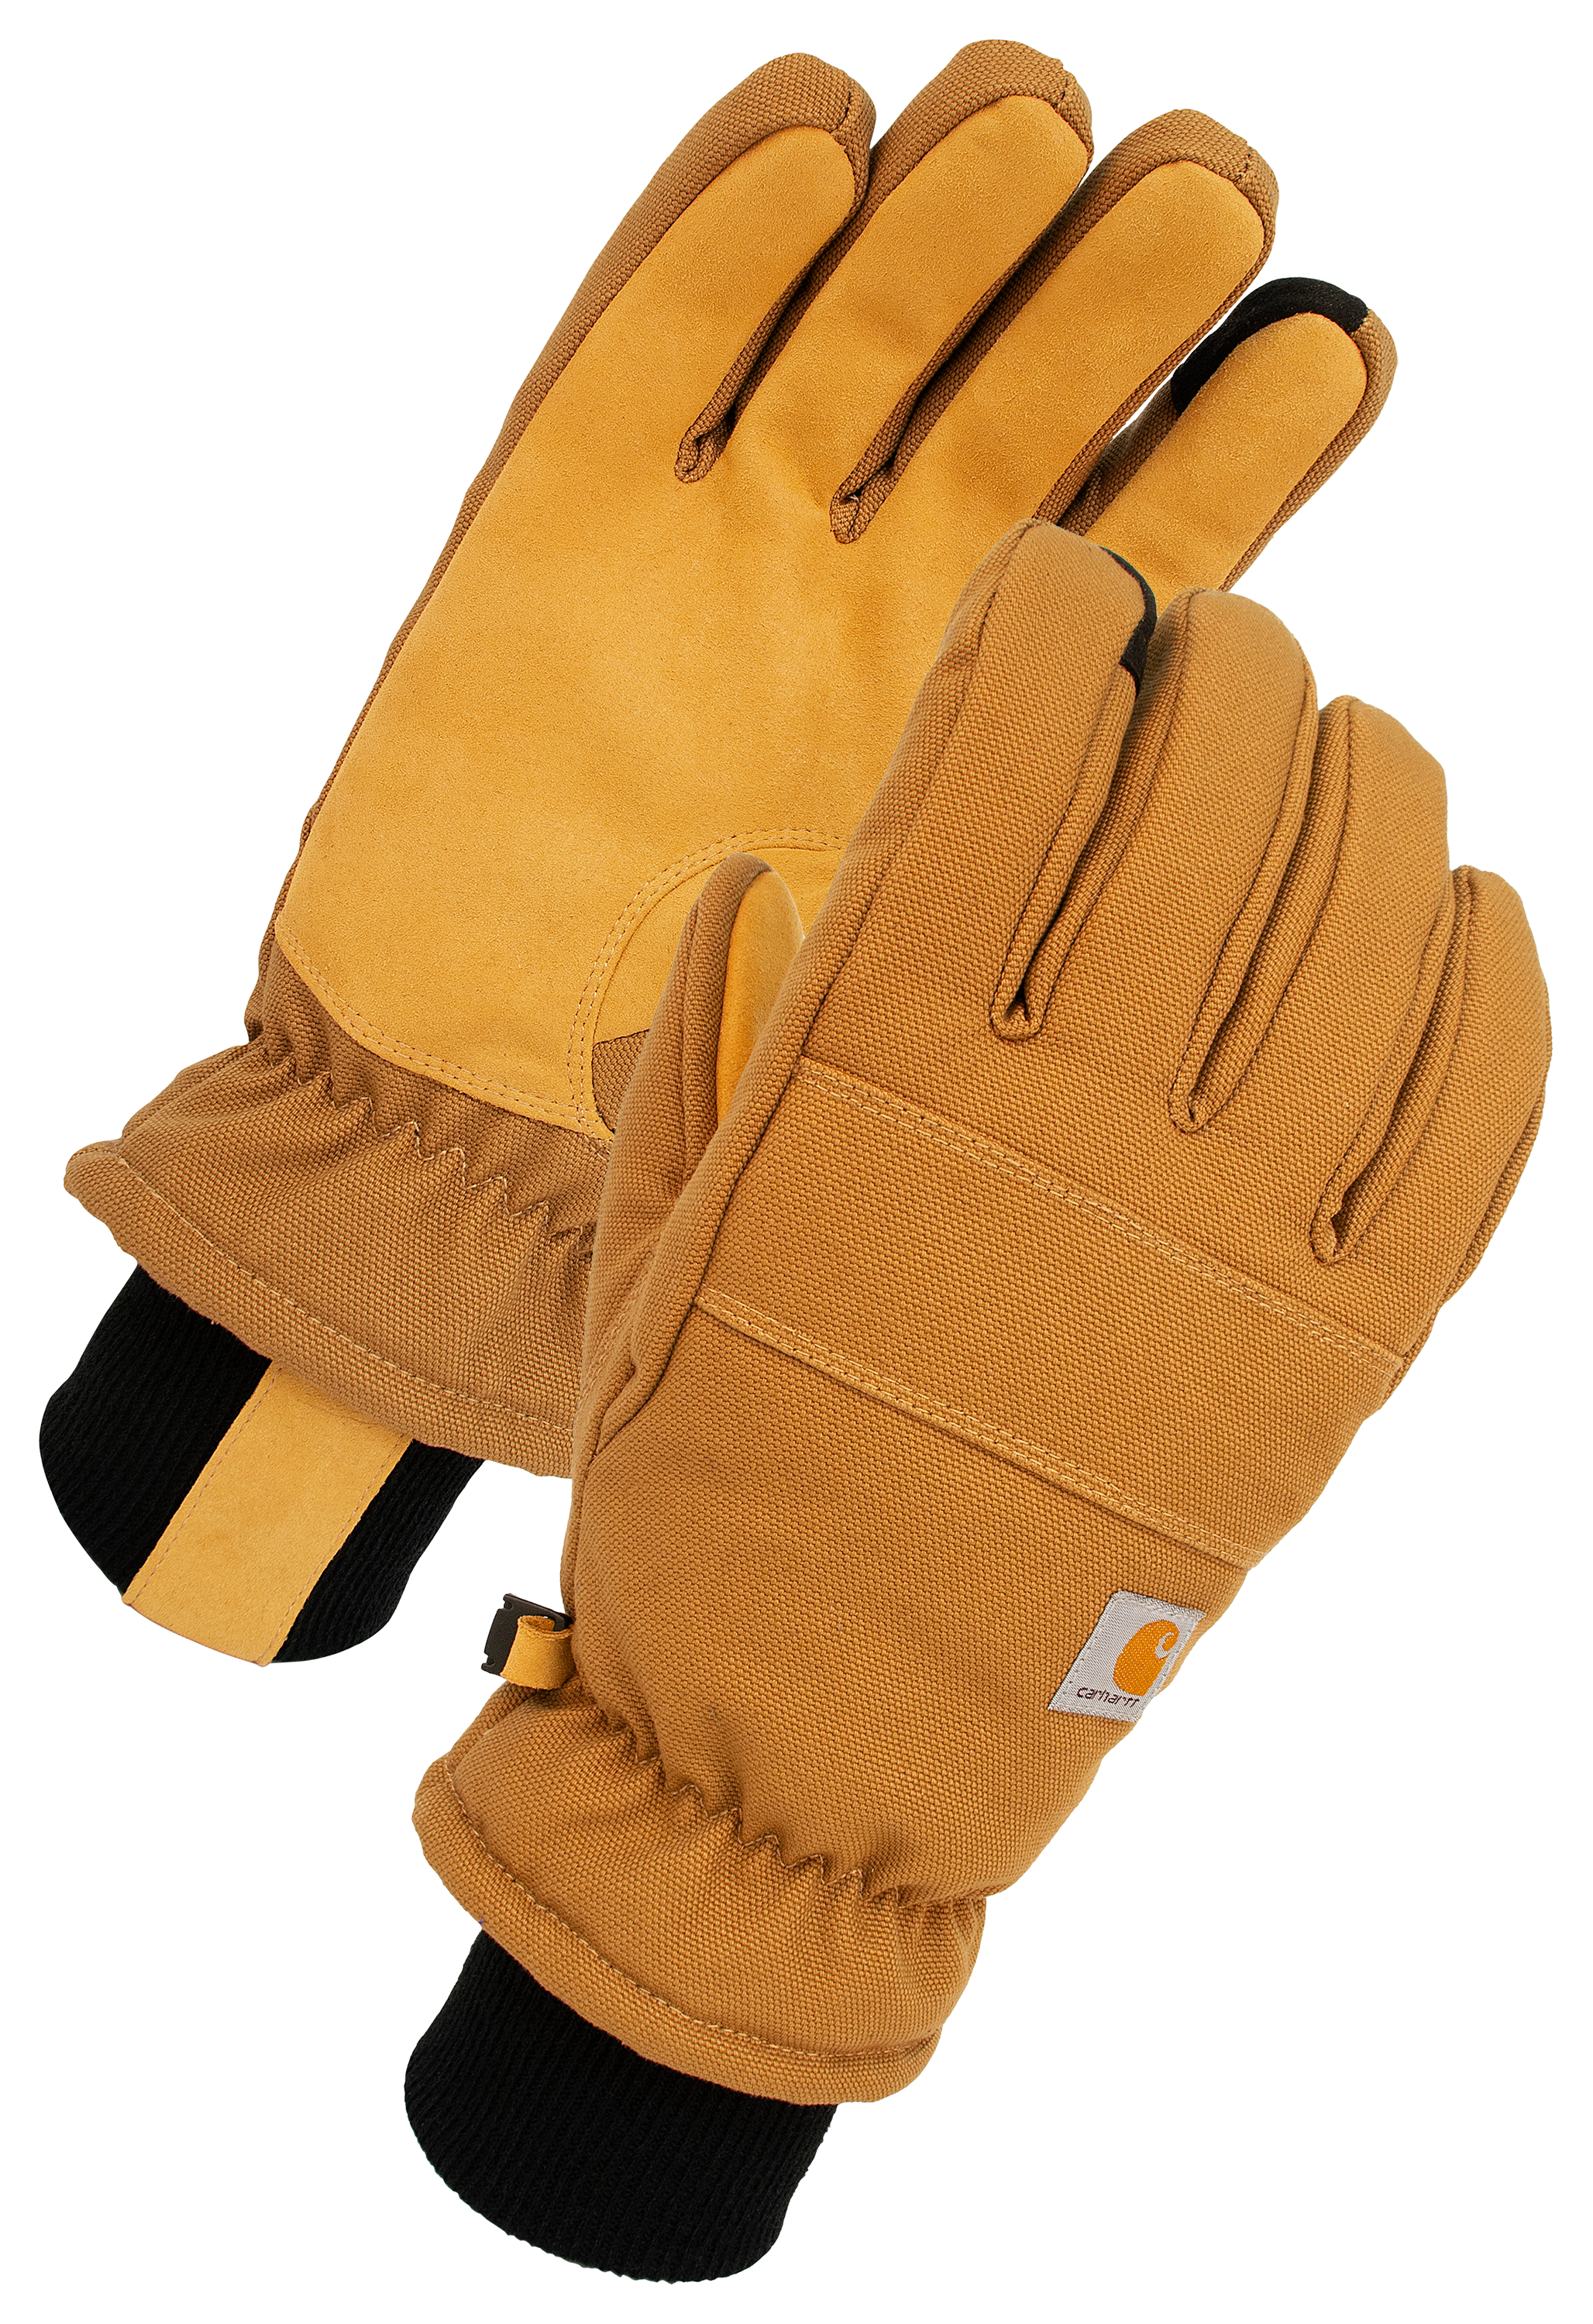 Carhartt Insulated Duck Synthetic Leather Knit Cuff Gloves for Men - Brown - L